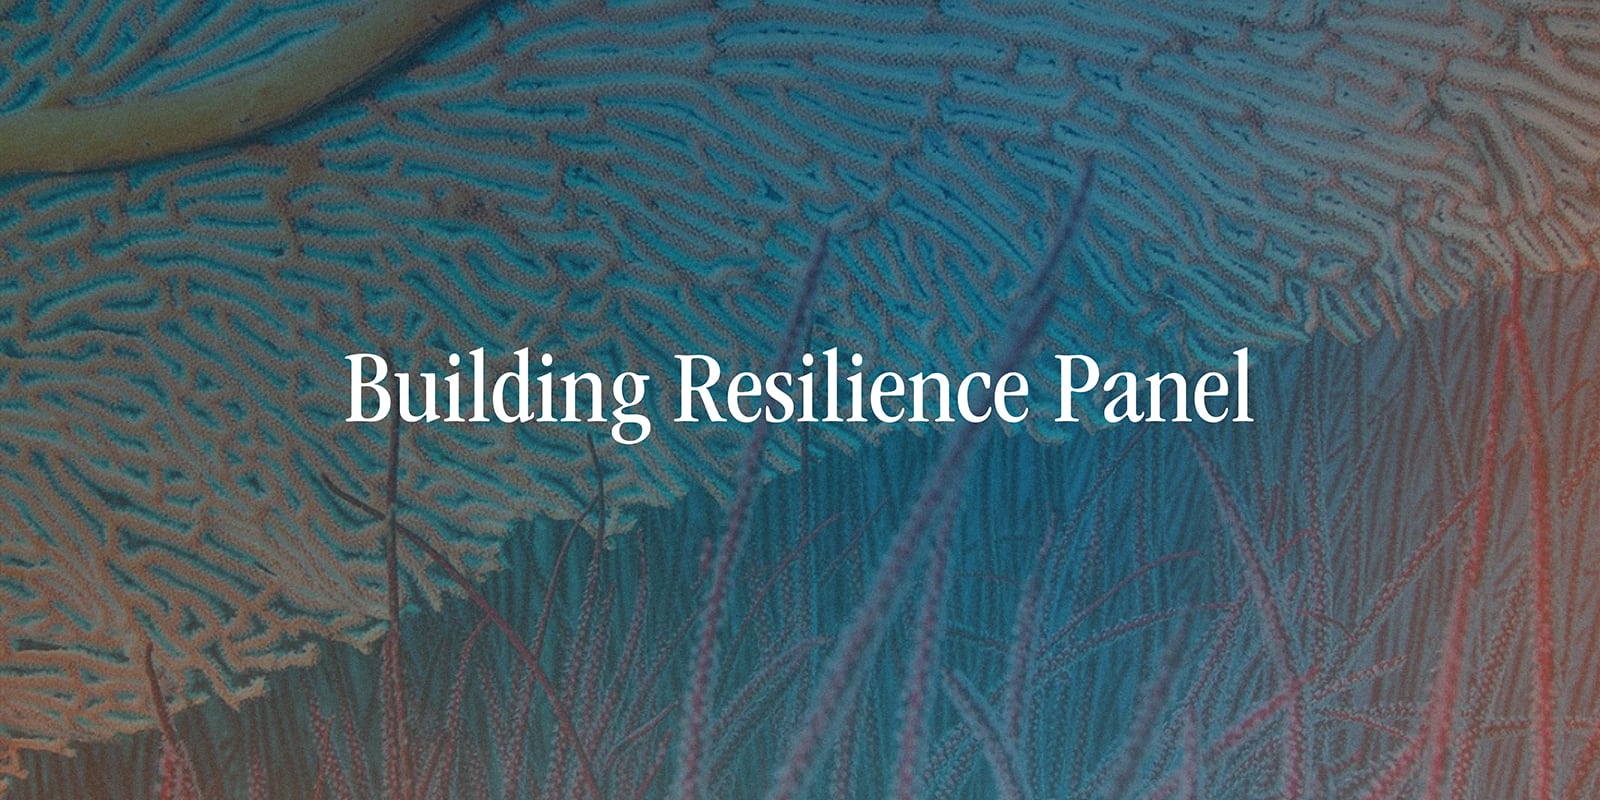 Building Resilience Panel